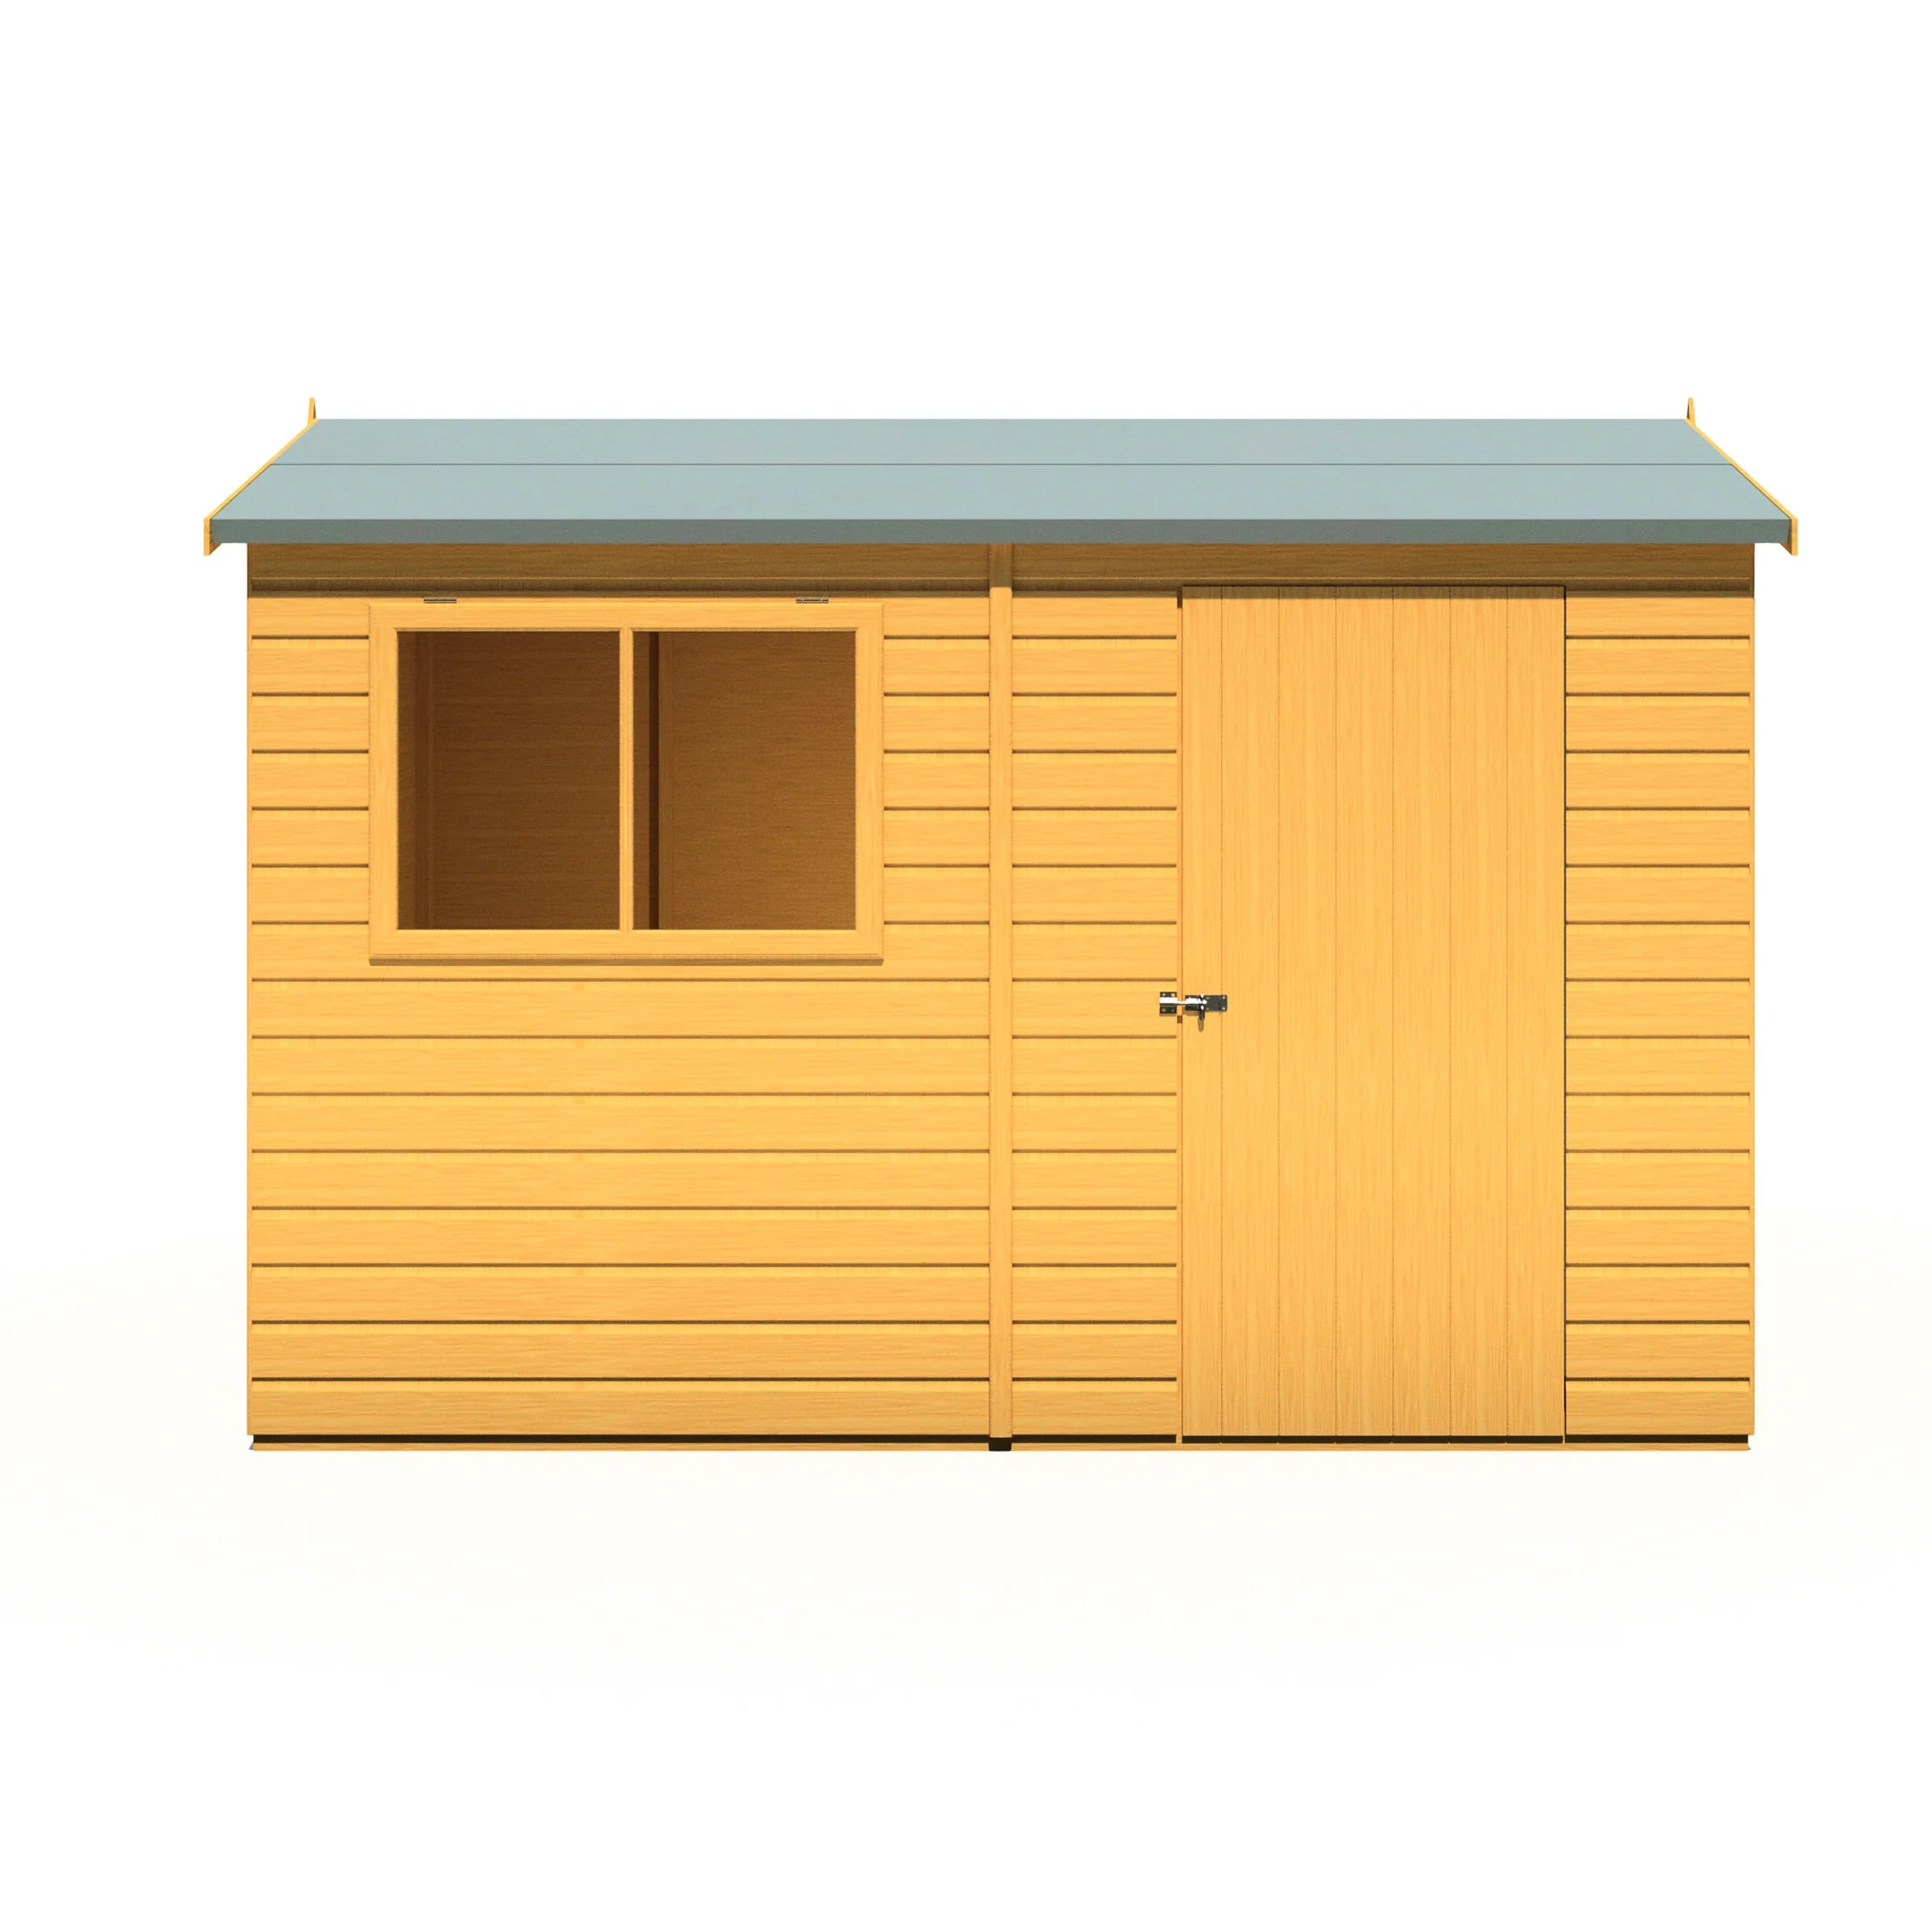 Shire Lewis Reverse Apex Style C Single Door Shed 10x6